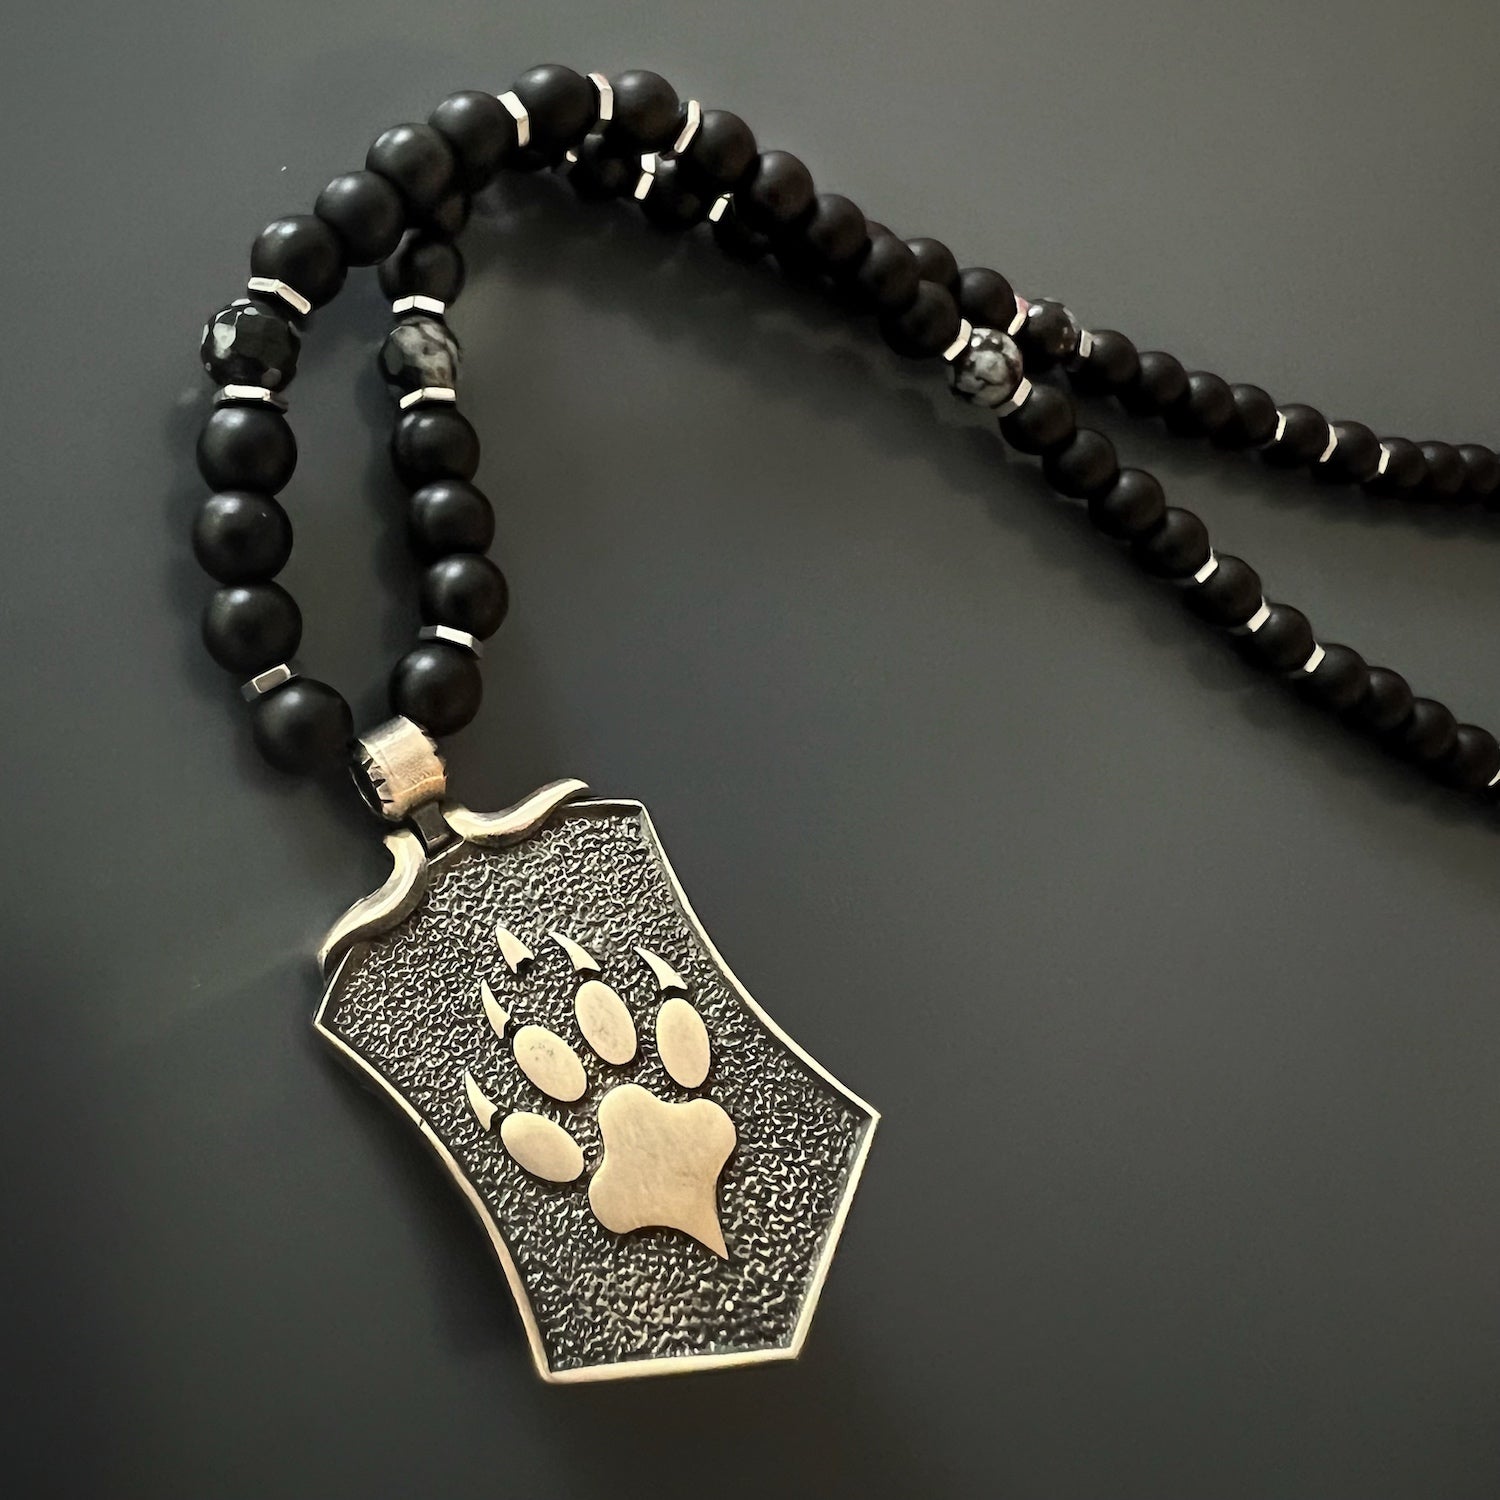 Discover the essence of strength and freedom with the Spirit Onyx Wolf Necklace, a remarkable jewelry piece.